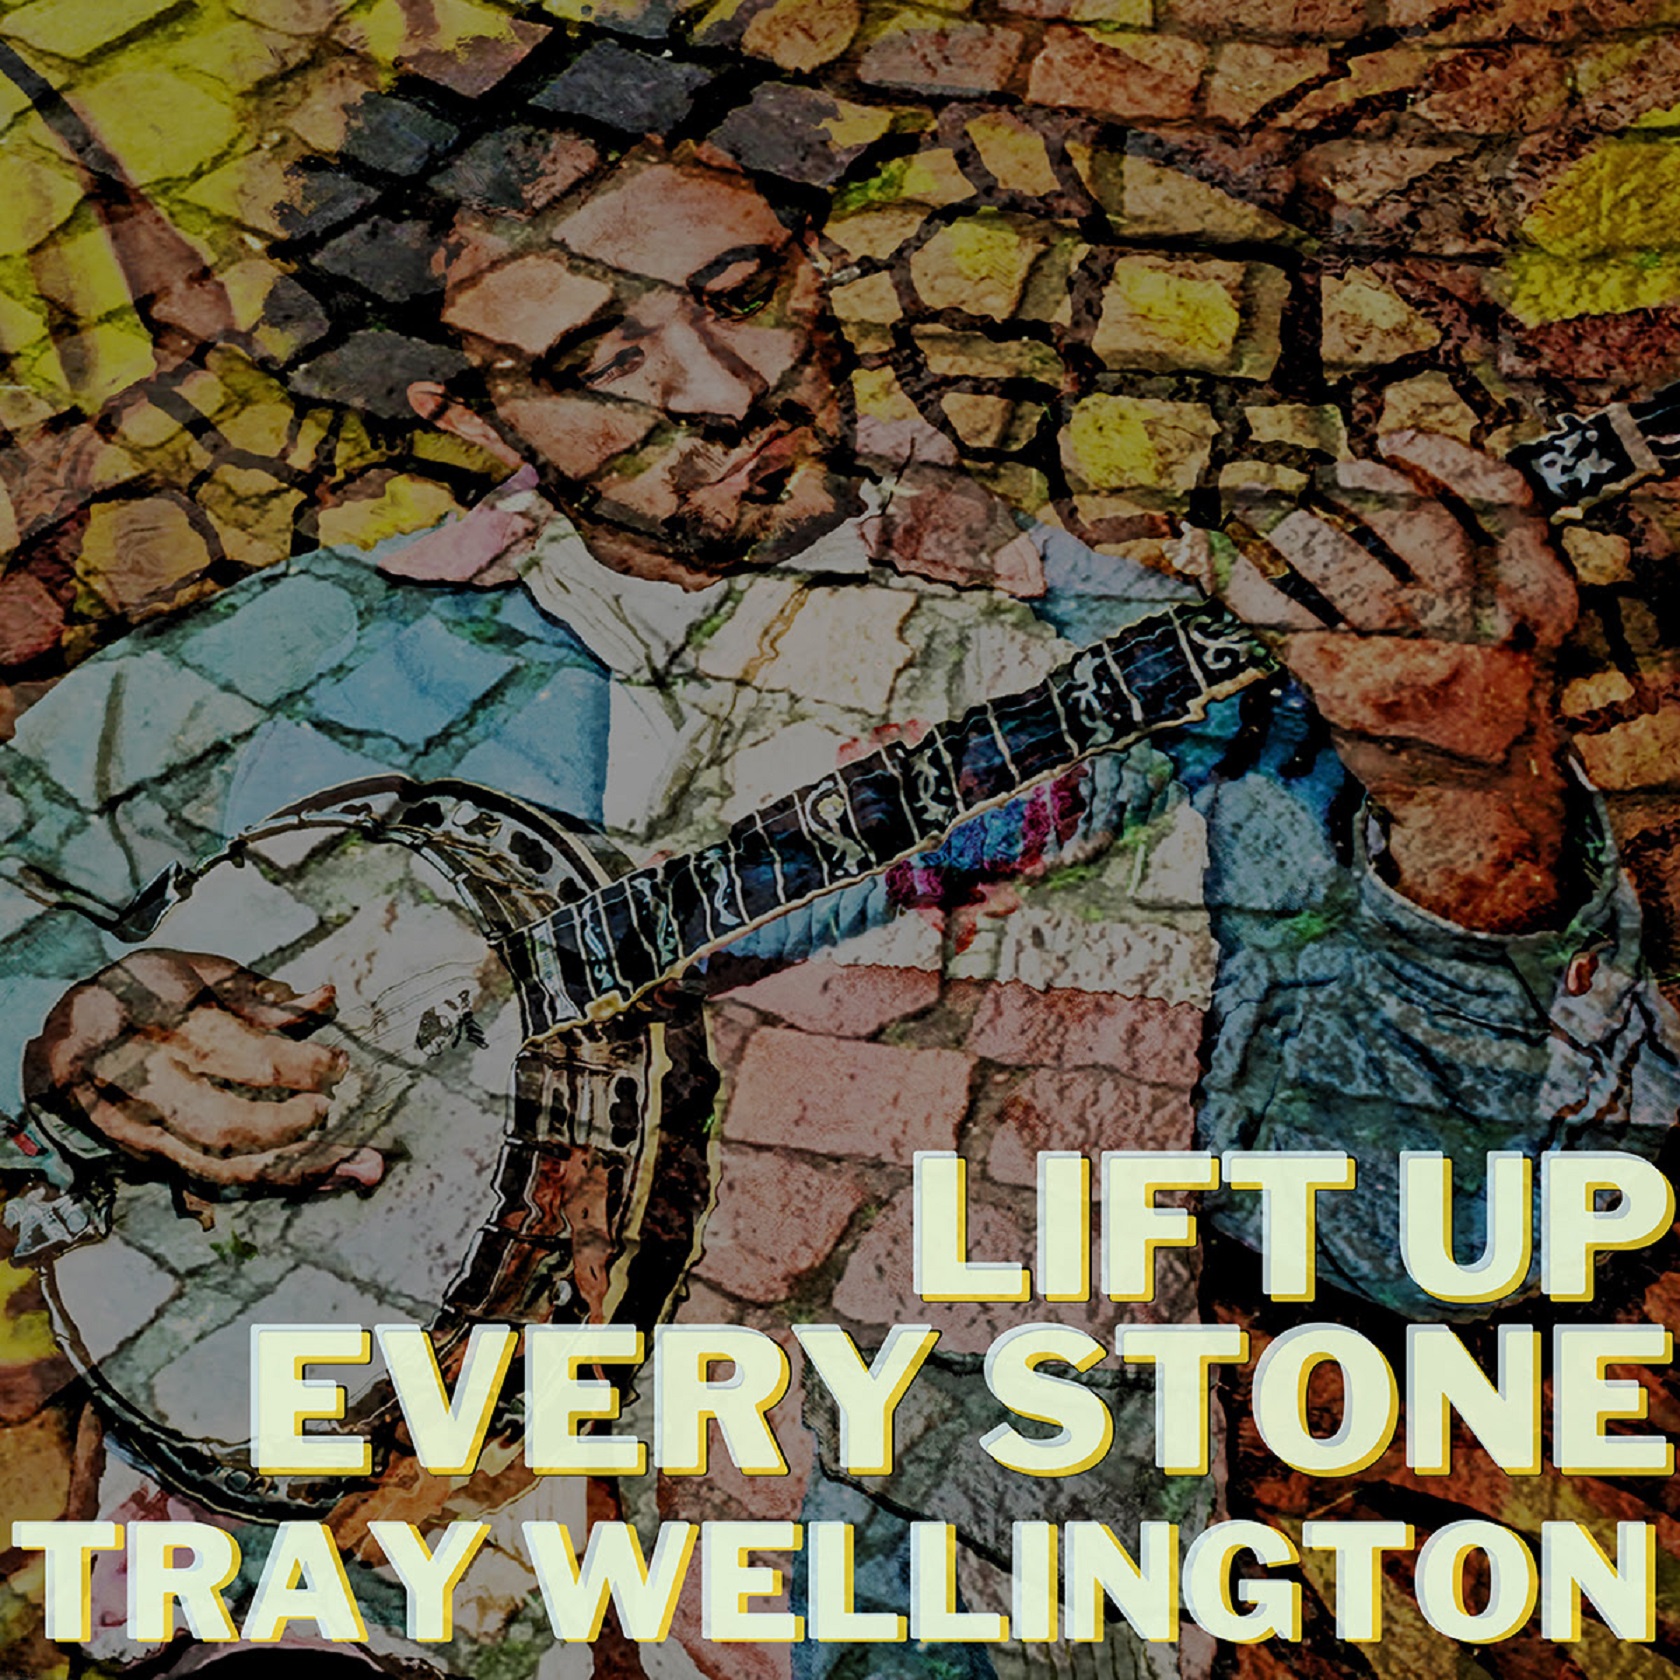 Tray Wellington’s “Lift Up Every Stone” moves past musical boundaries